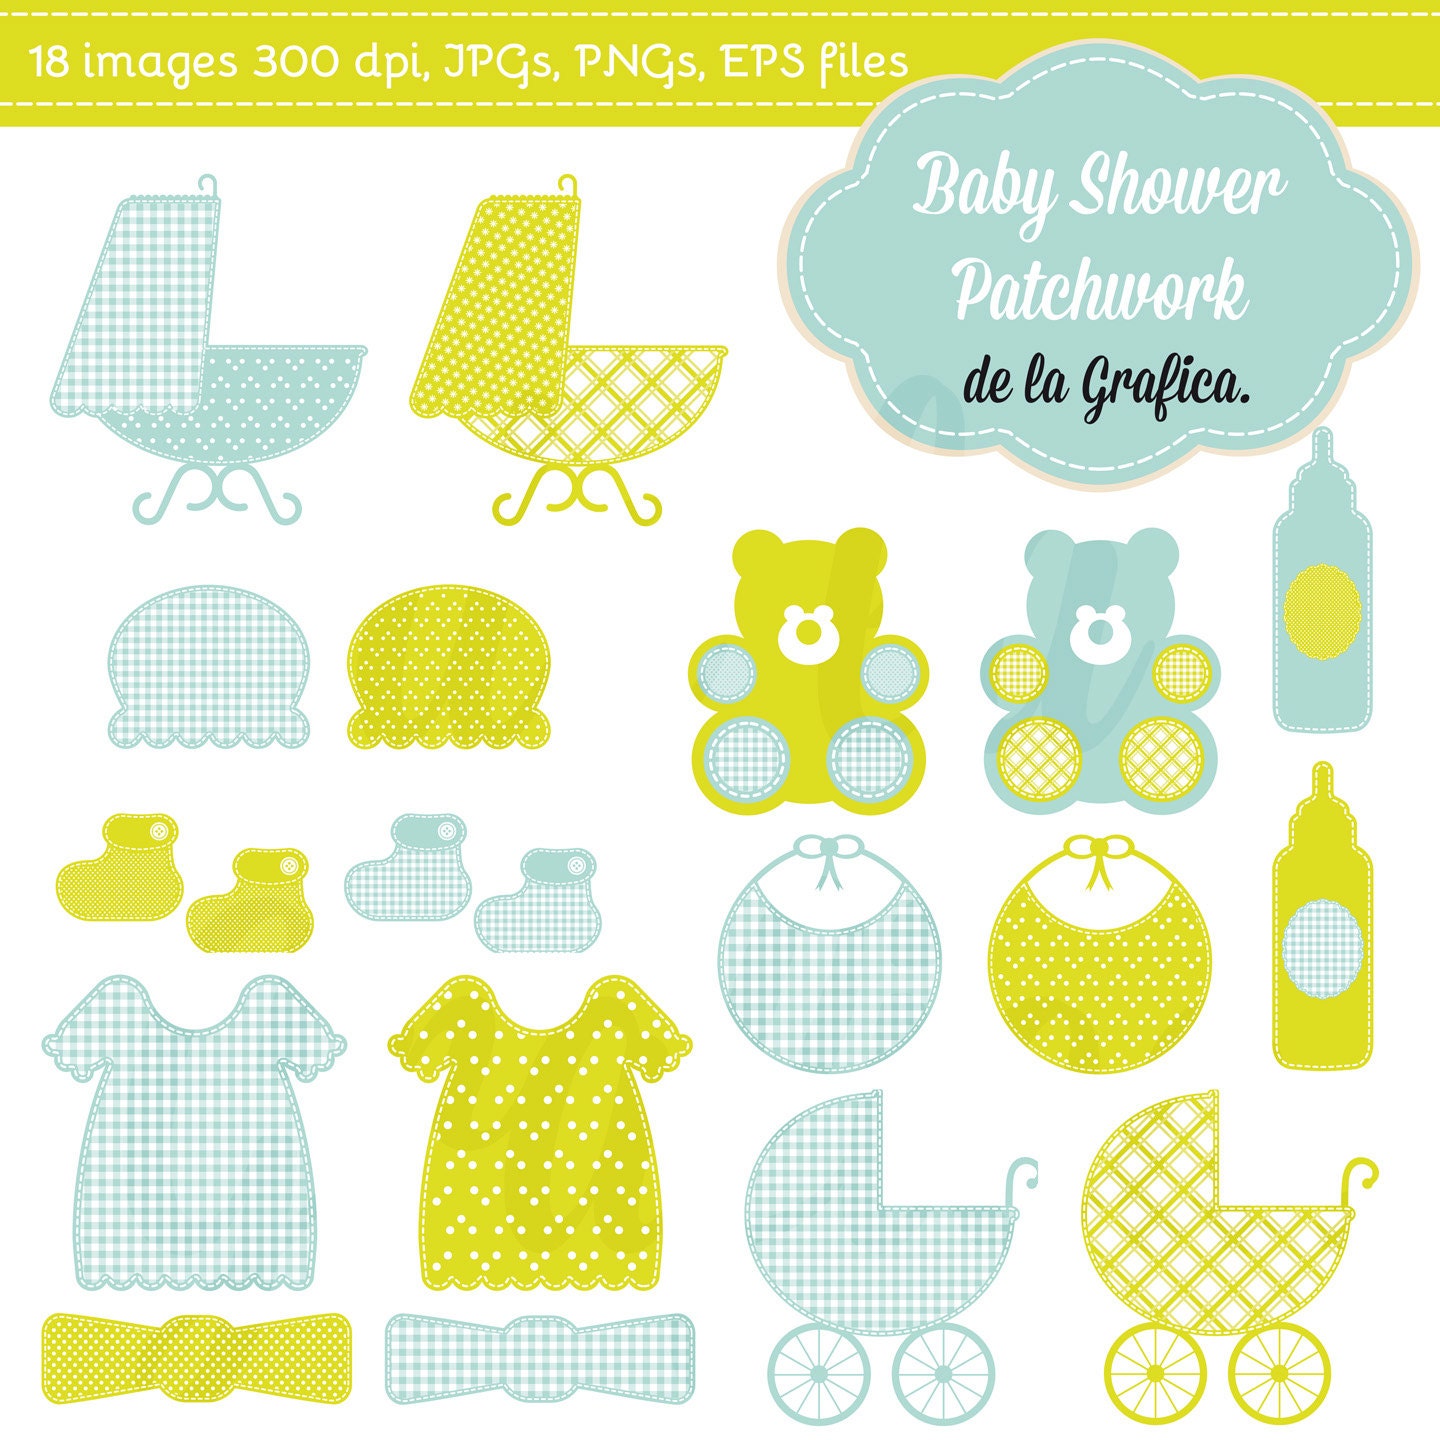 baby shower clipart etsy - photo #19